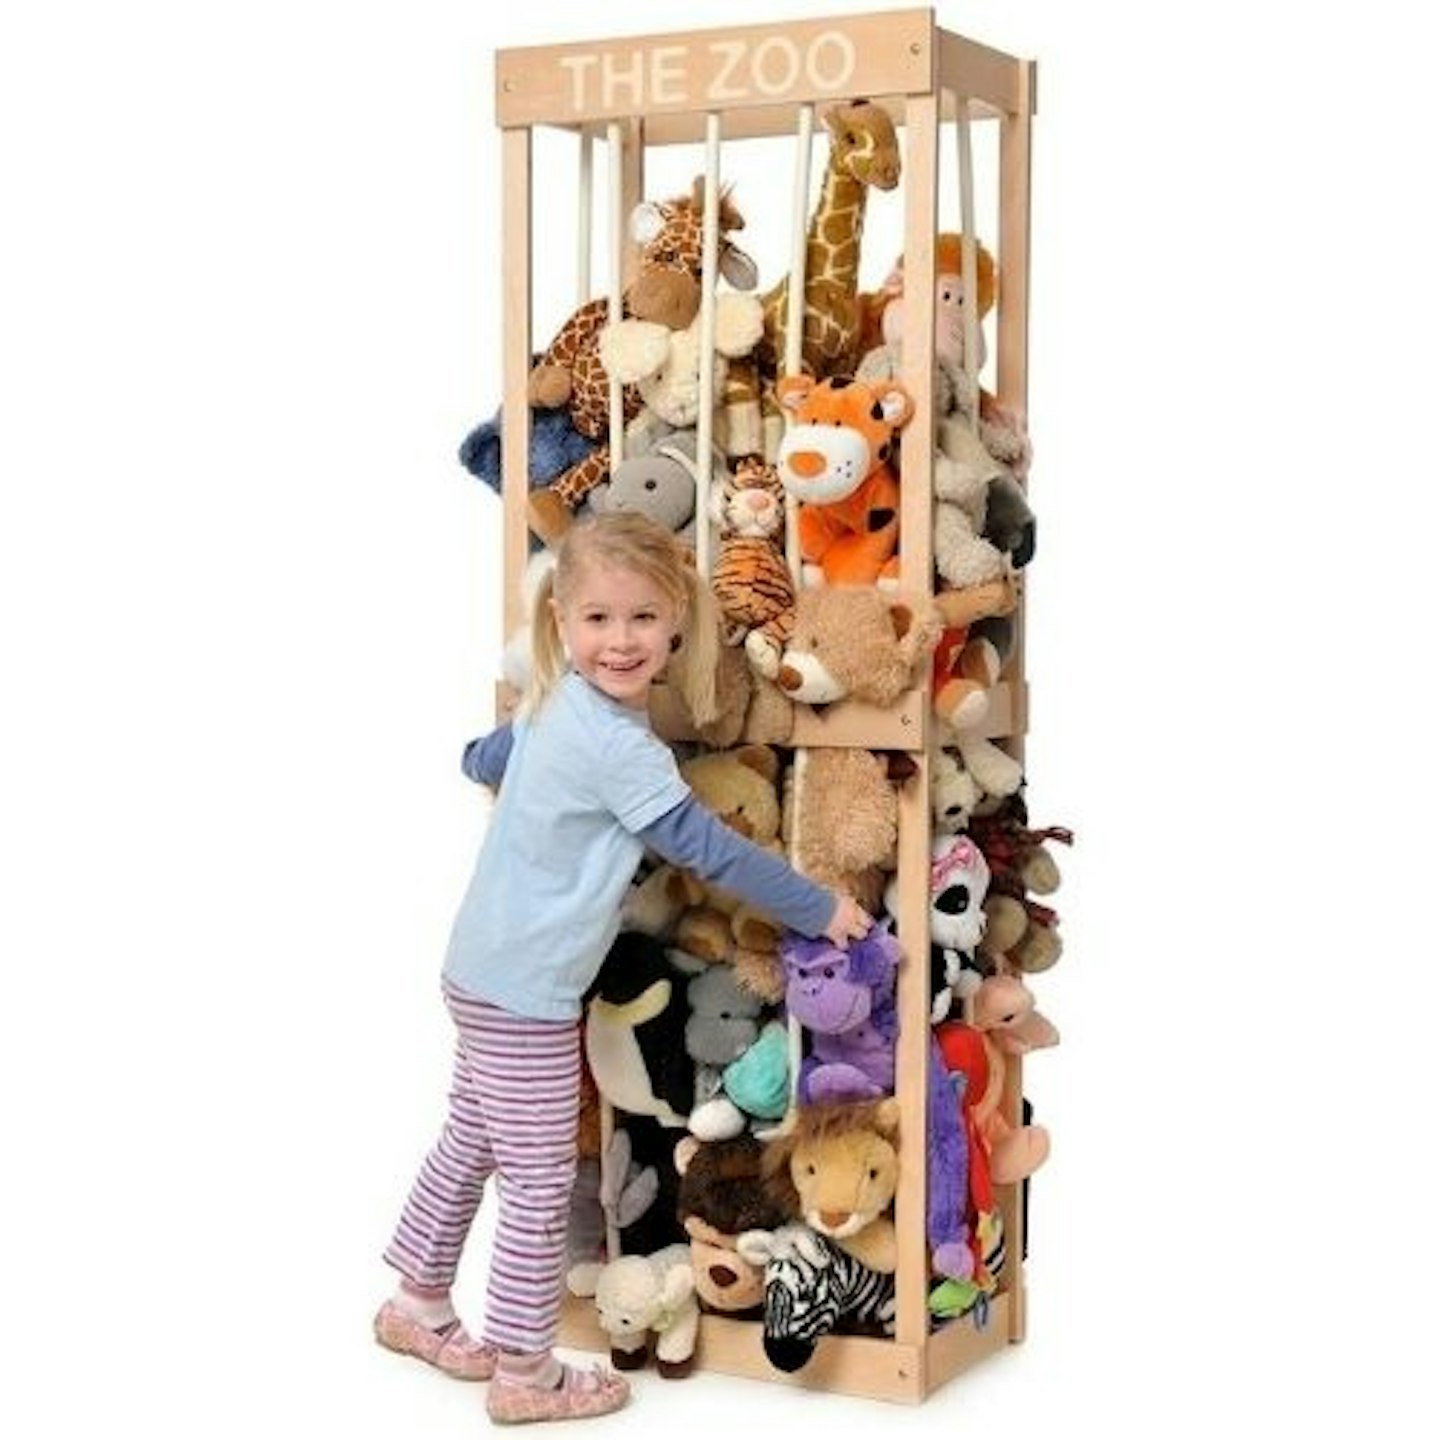 The Zoo u00ae - Soft Toy Storage Solution by Little Zookeepers